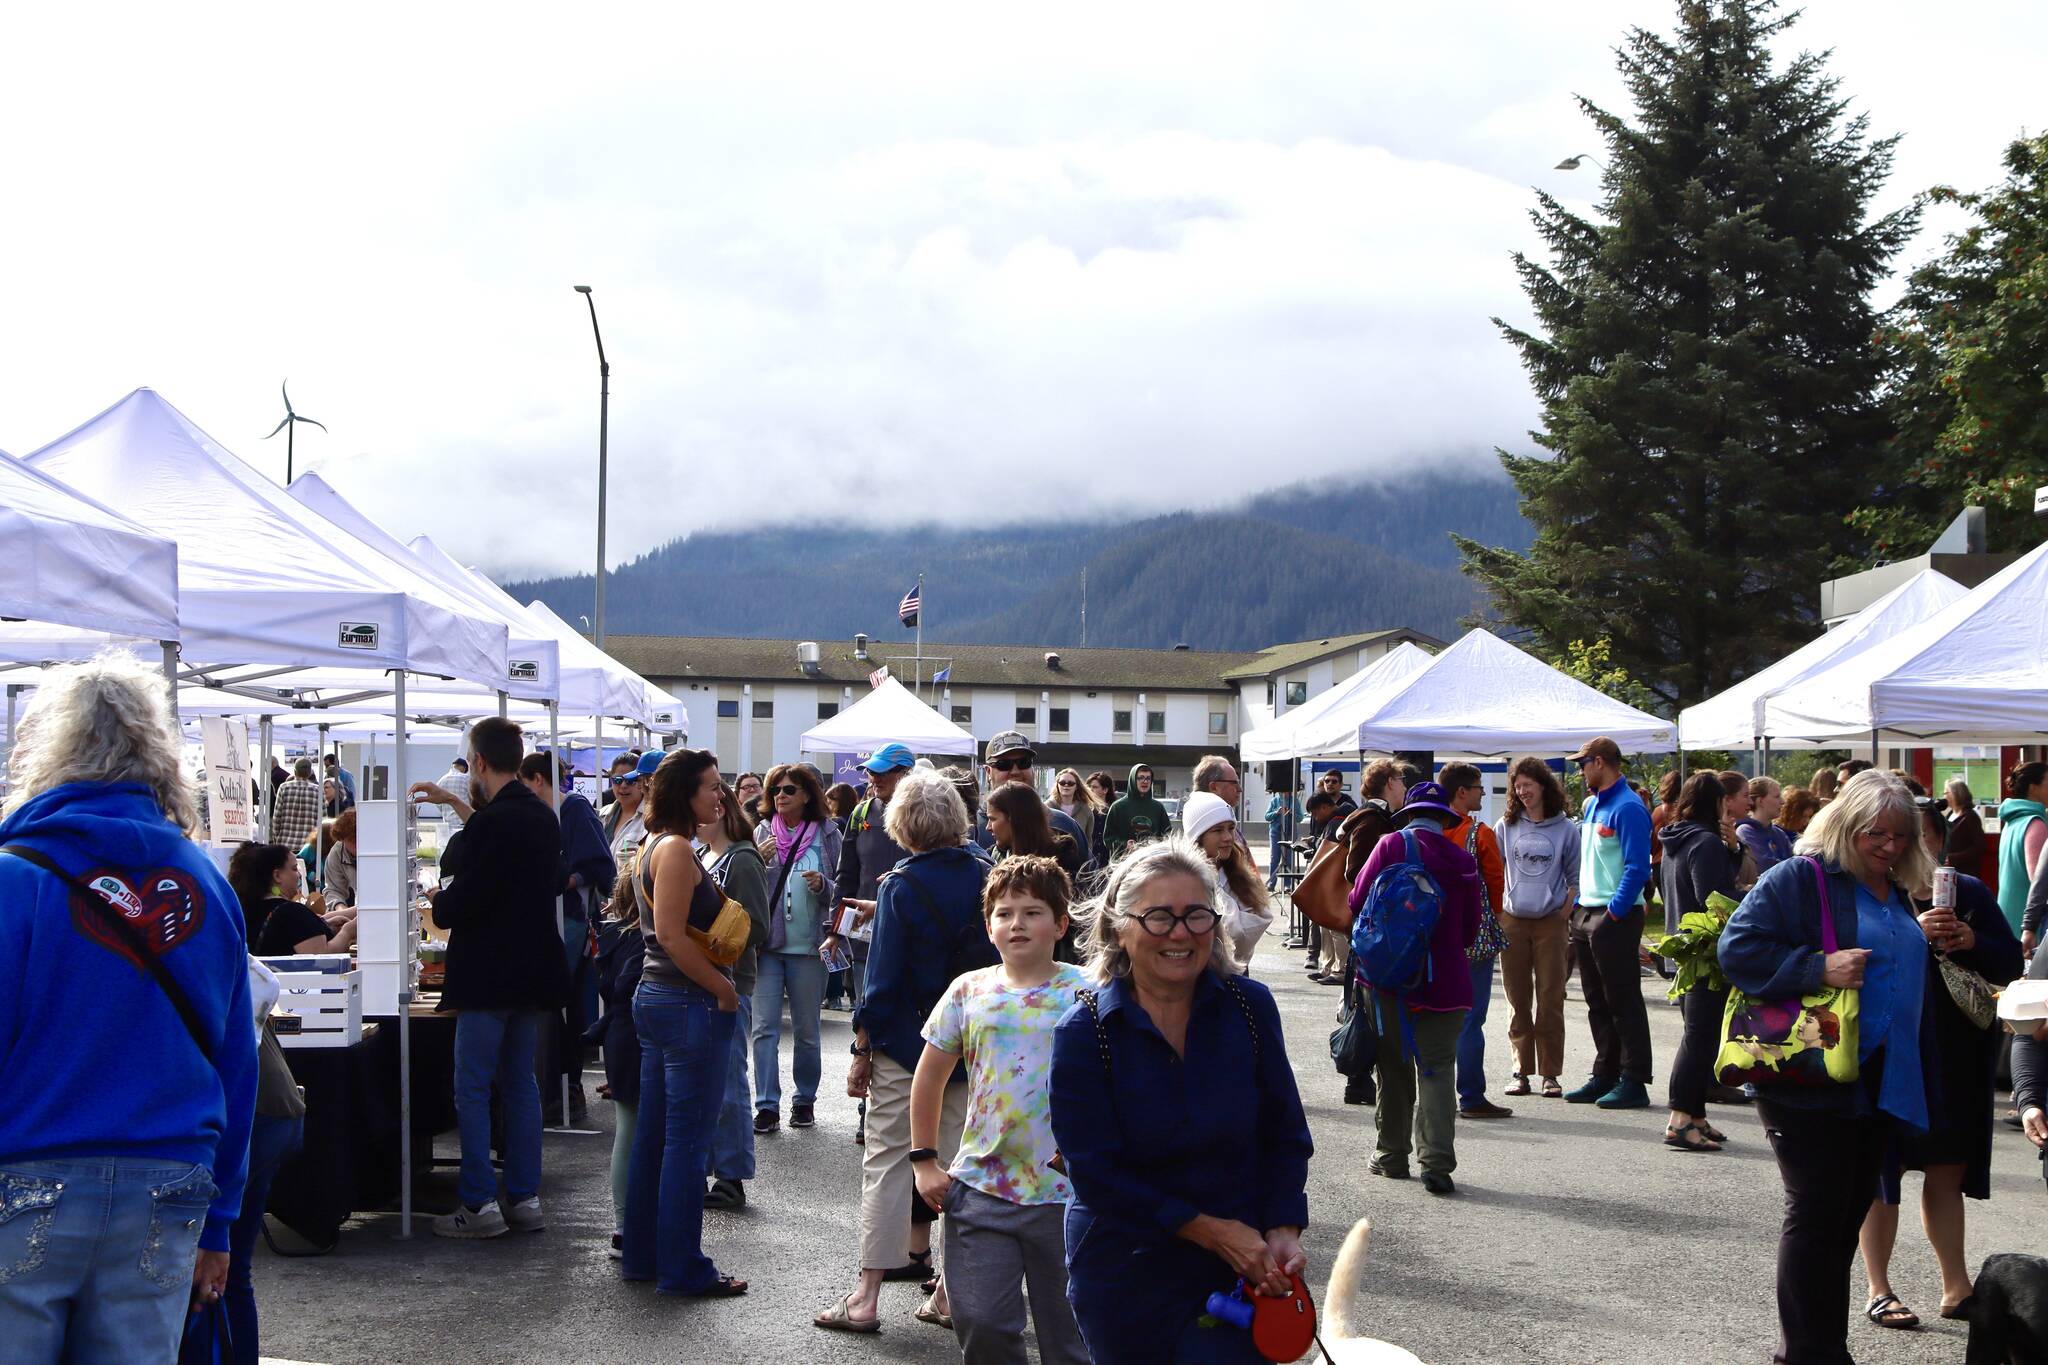 People explore the vendor tents in the parking lot of the Juneau Arts & Culture Center during the Annual Food Festival & Farmer’s Market on Saturday. (Meredith Jordan / Juneau Empire)